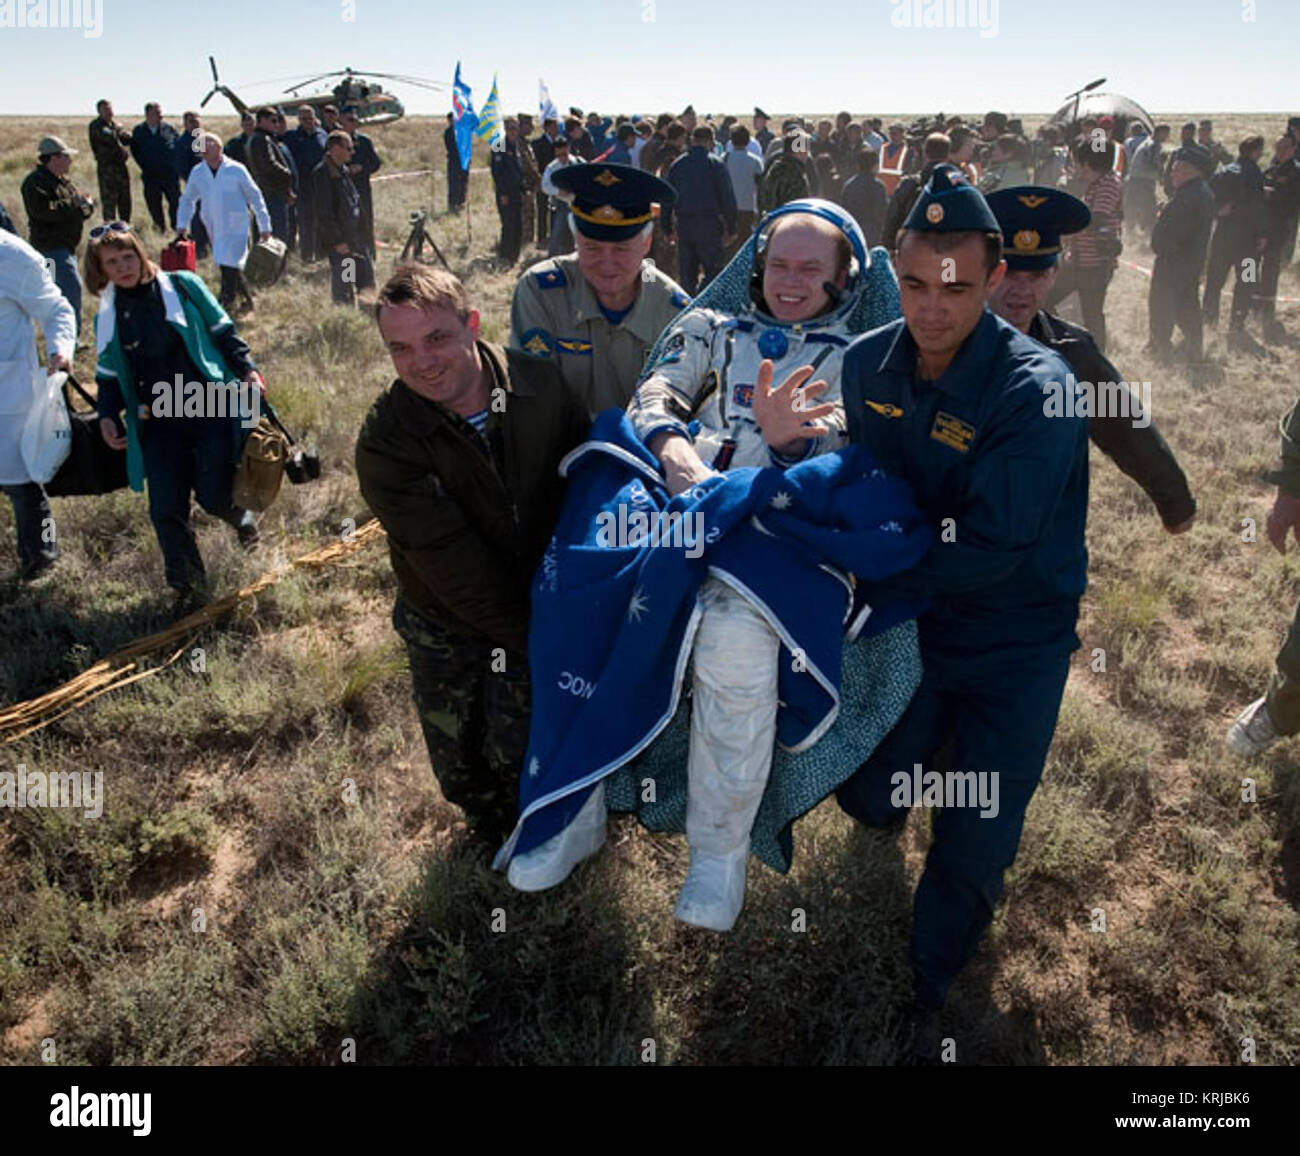 Expedition 23 Commander Oleg Kotov is carried in a chair to the medical tent just minutes after he and fellow crew members T.J. Creamer and Soichi Noguchi landed in their Soyuz TMA-17 capsule near the town of Zhezkazgan, Kazakhstan on Wednesday, June 2, 2010. NASA Astronaut Creamer, Russian Cosmonaut Kotov and Japanese Astronaut Noguchi are returning from six months onboard the International Space Station where they served as members of the Expedition 22 and 23 crews. Photo Credit: (NASA/Bill Ingalls) Kotov28129 Stock Photo